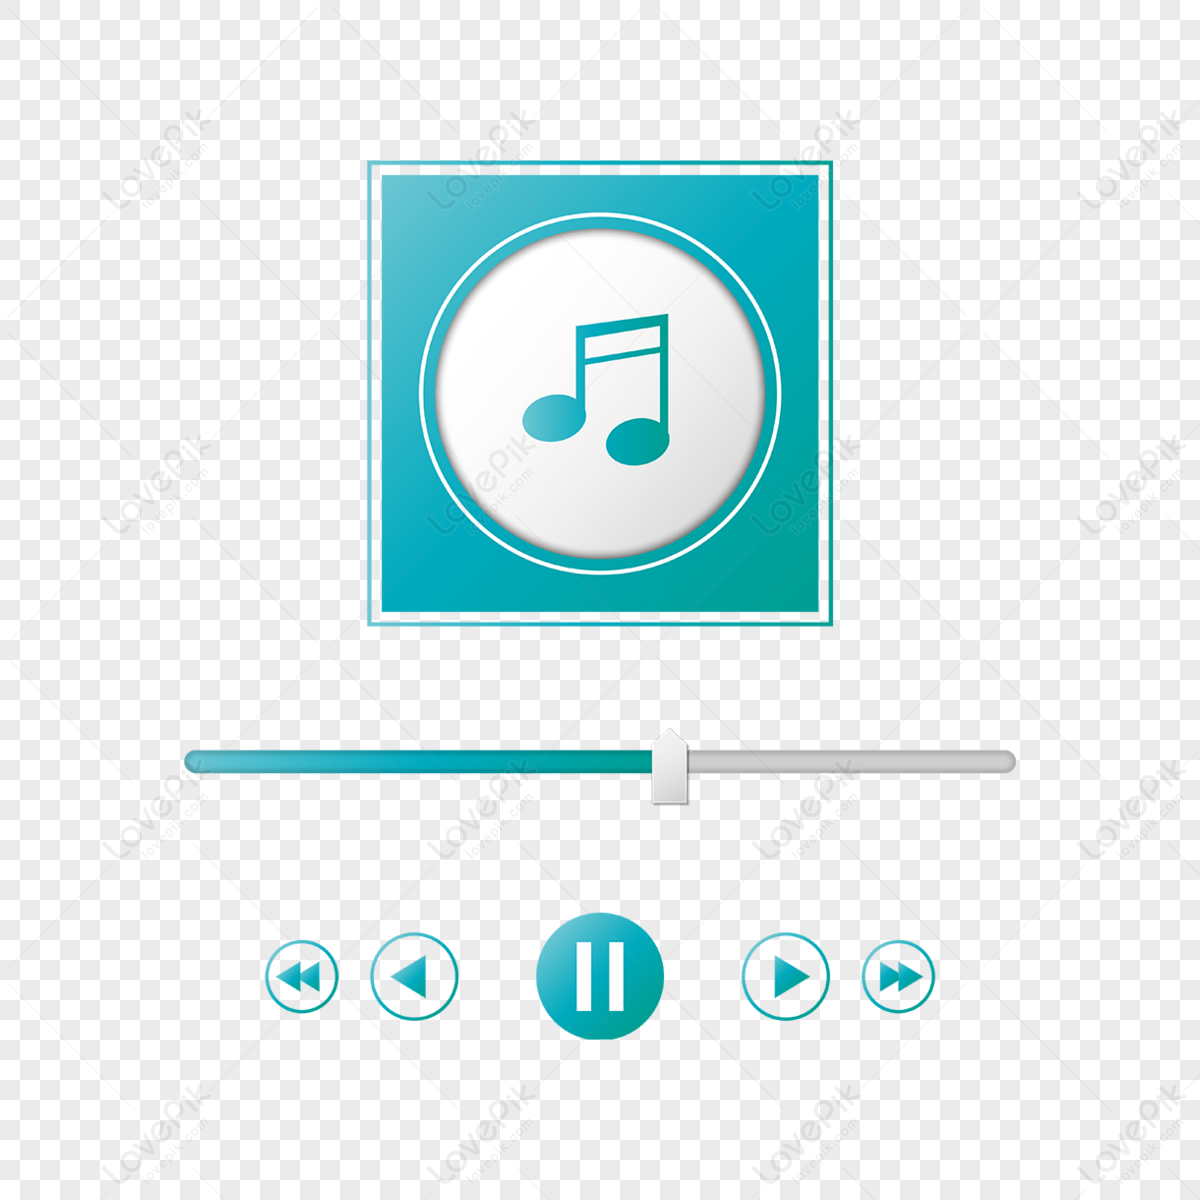 Music player icon Royalty Free Vector Image - VectorStock